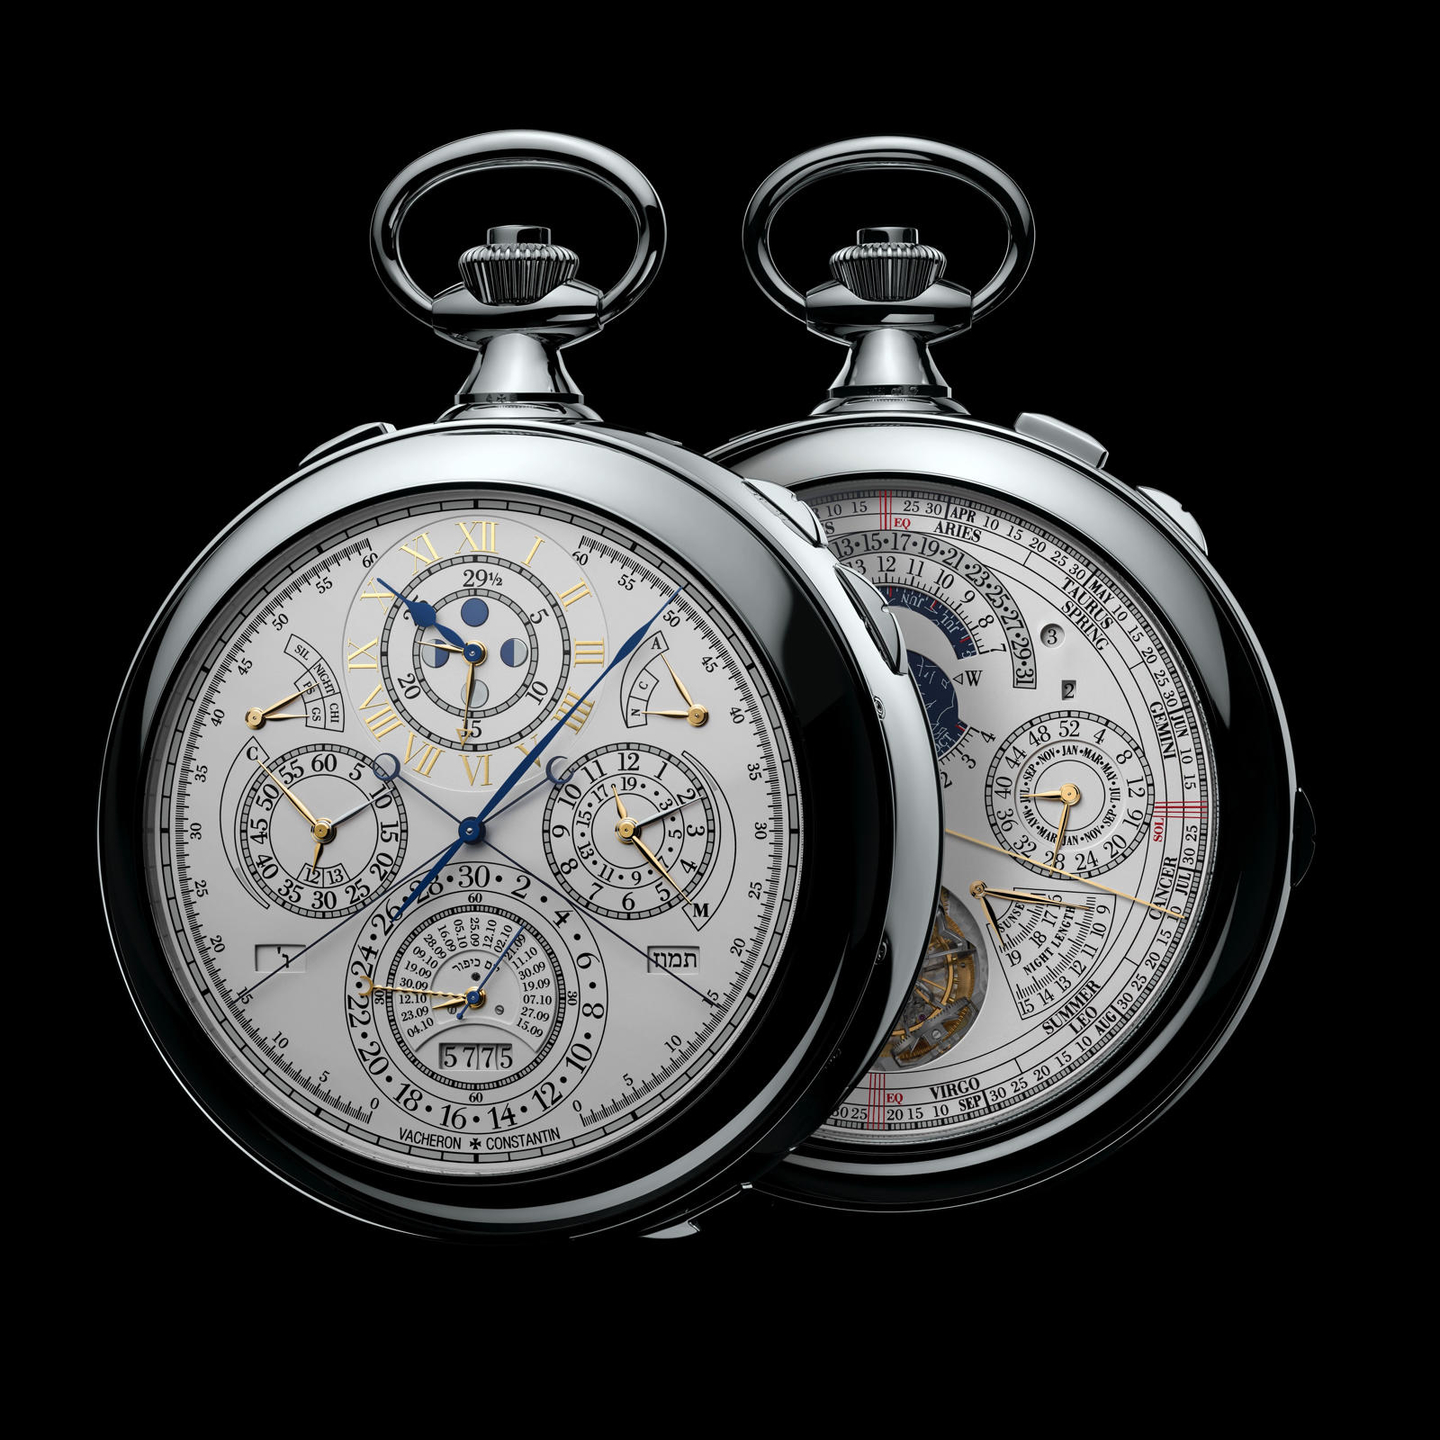 The Most Complicated Pocket Watch Ever Made